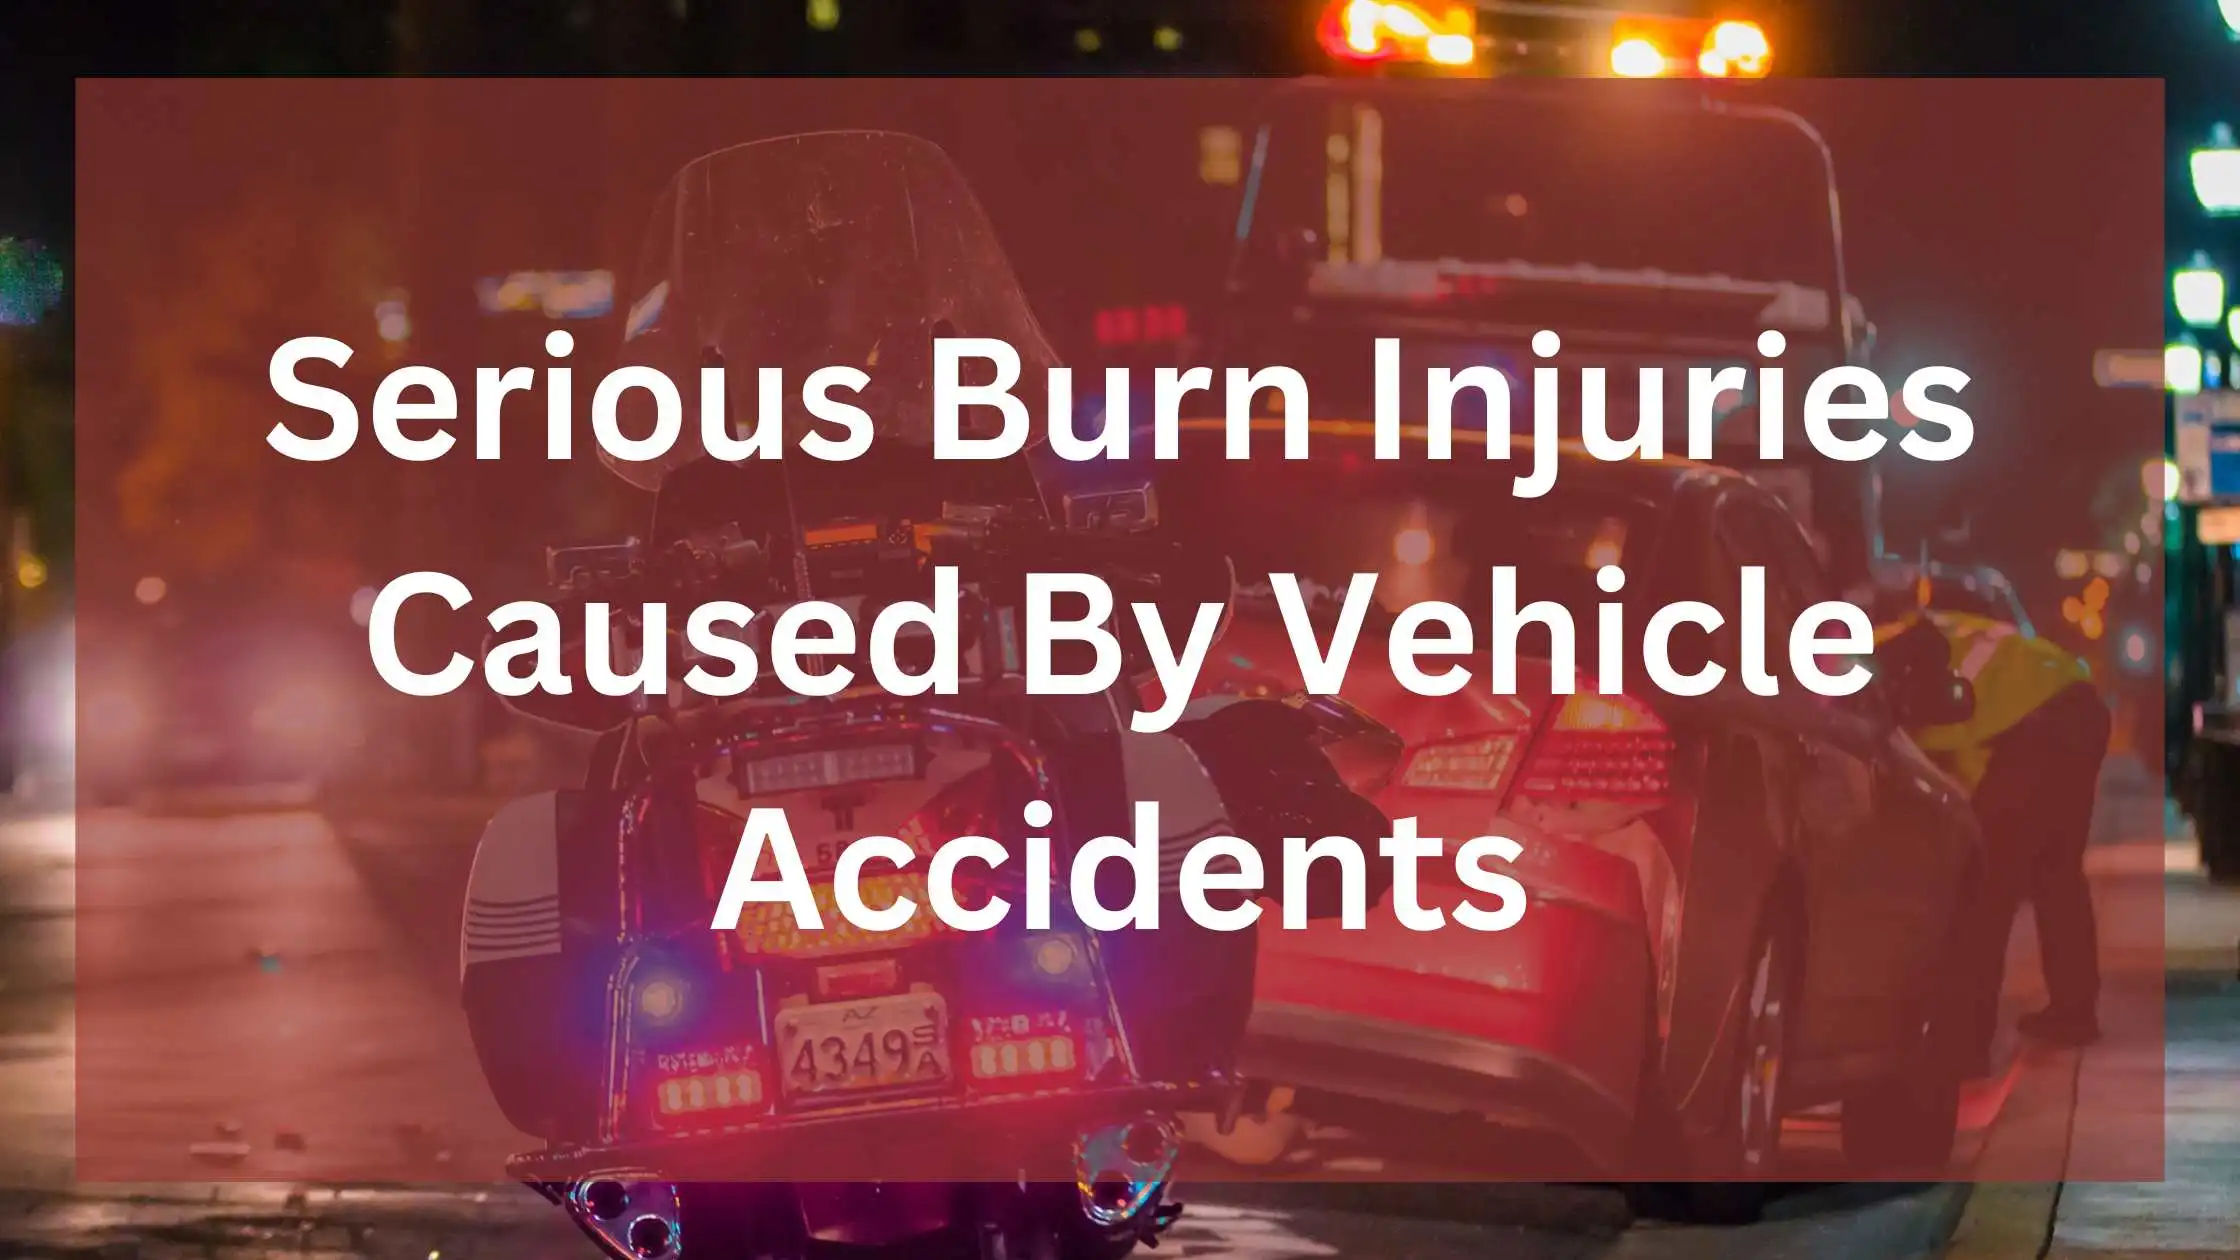 Serious Burn Injuries Caused By Vehicle Accidents